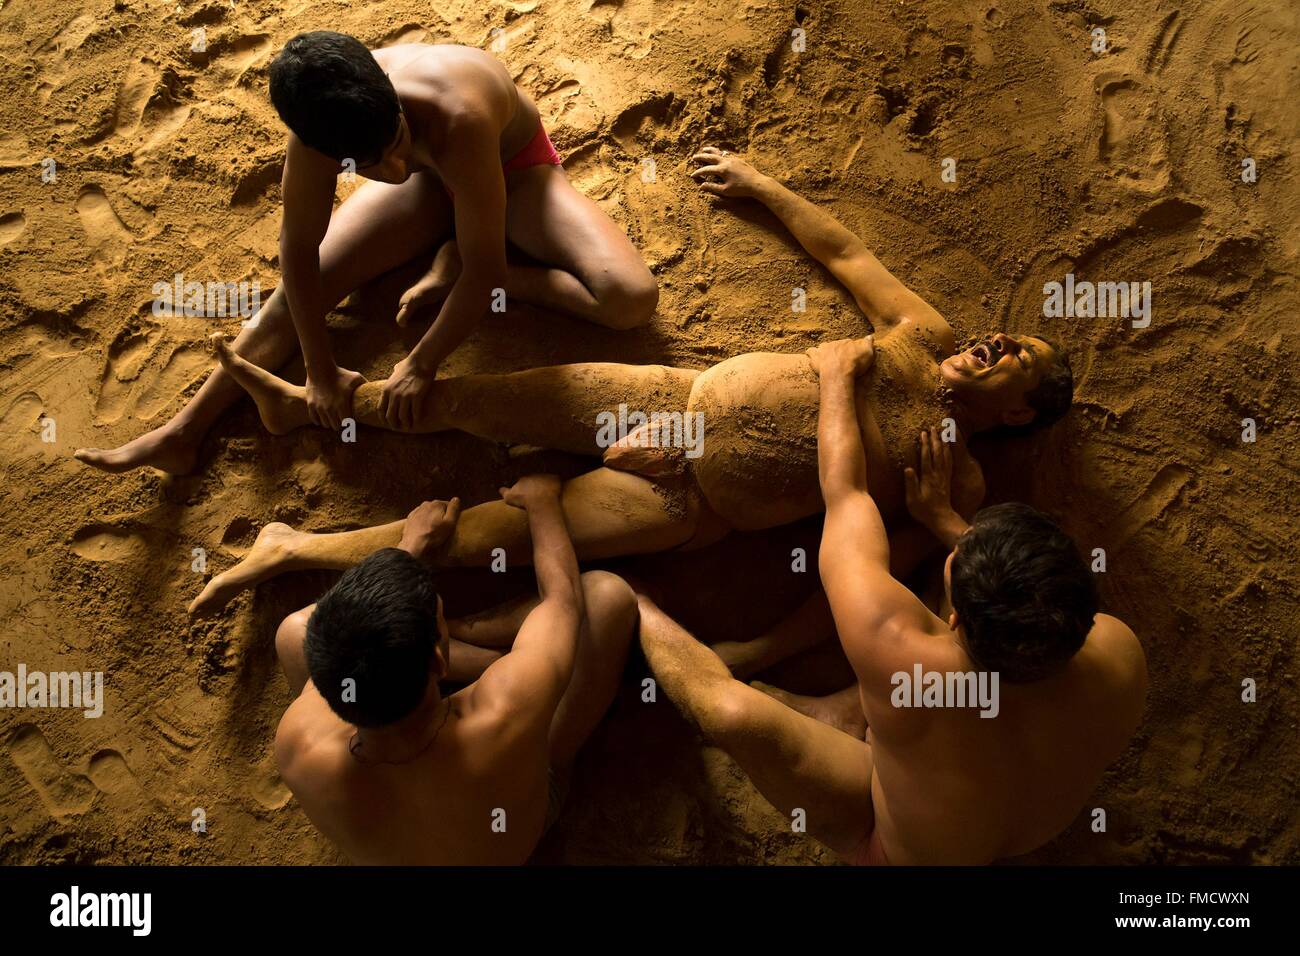 India, Uttar Pradesh State, Varanasi, Kushti or Indian traditional wrestling, the workout takes place in the Akhara, a pit Stock Photo